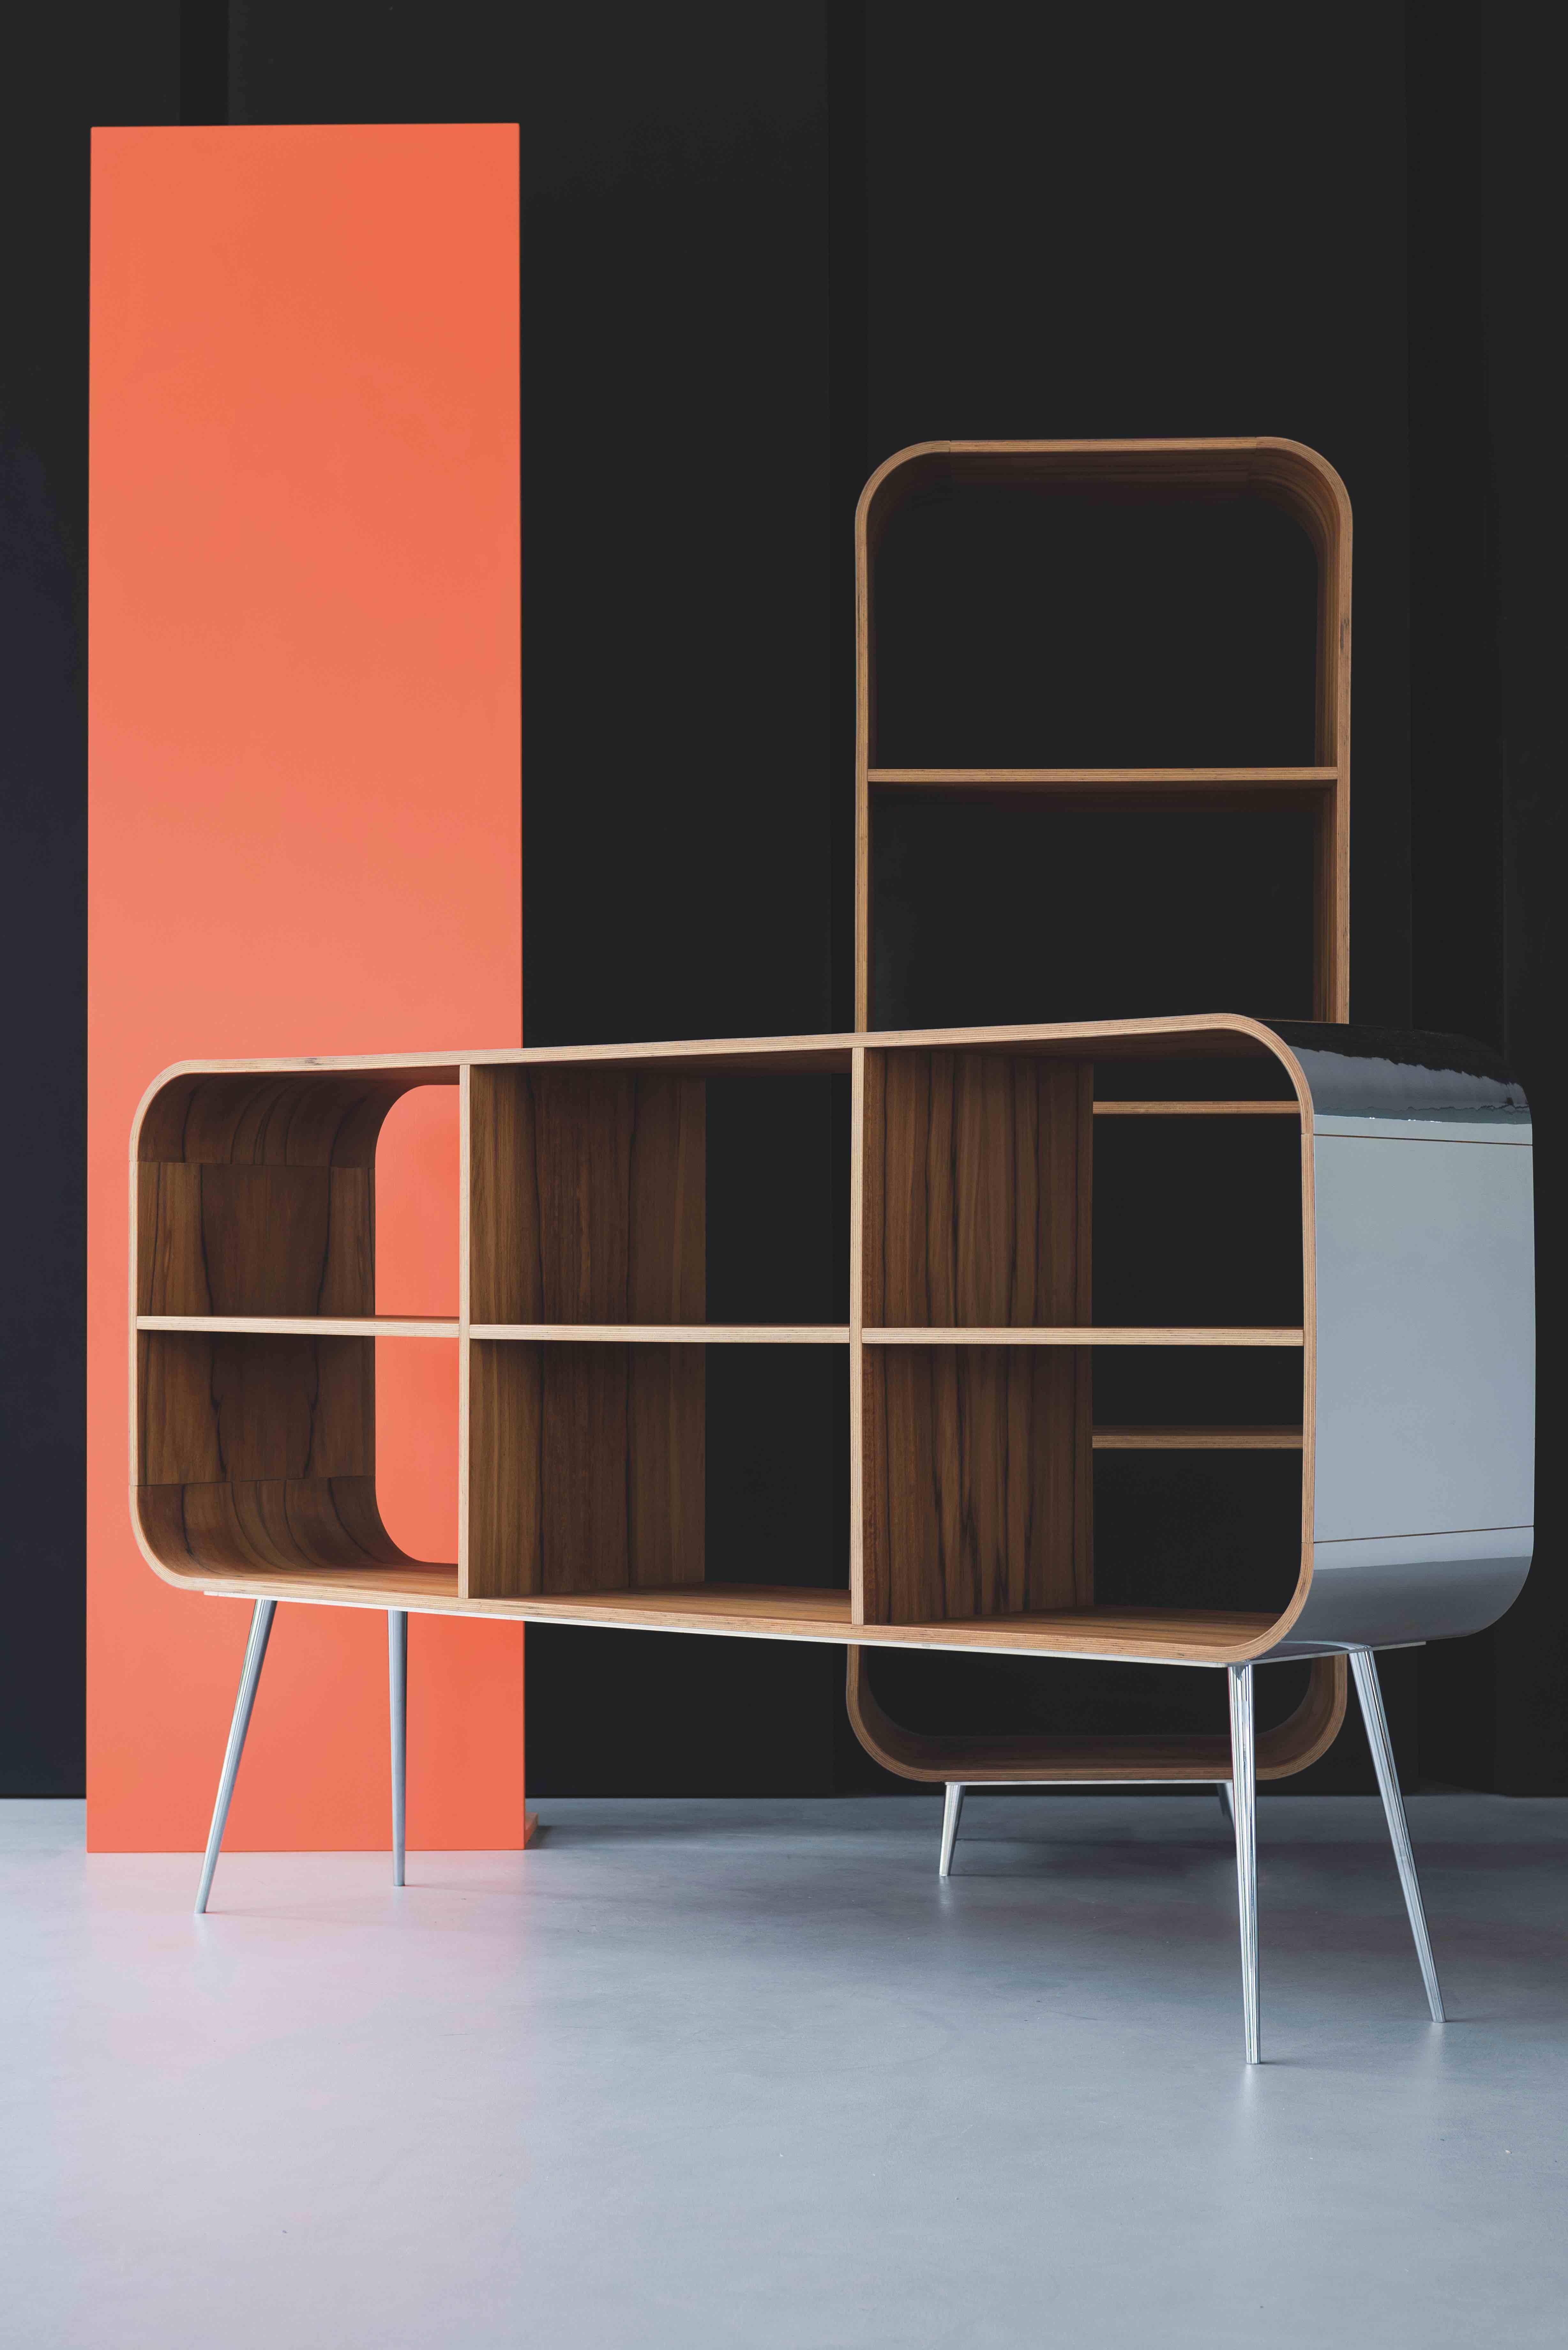 Eva III vertical shelve is designed to fit all your needs of storage and display. Modern and simple 
with chrome reflections. Made of apple wood a symbol of femininity and source of inspiration for it’s name.
While curvatures are fixed, the height